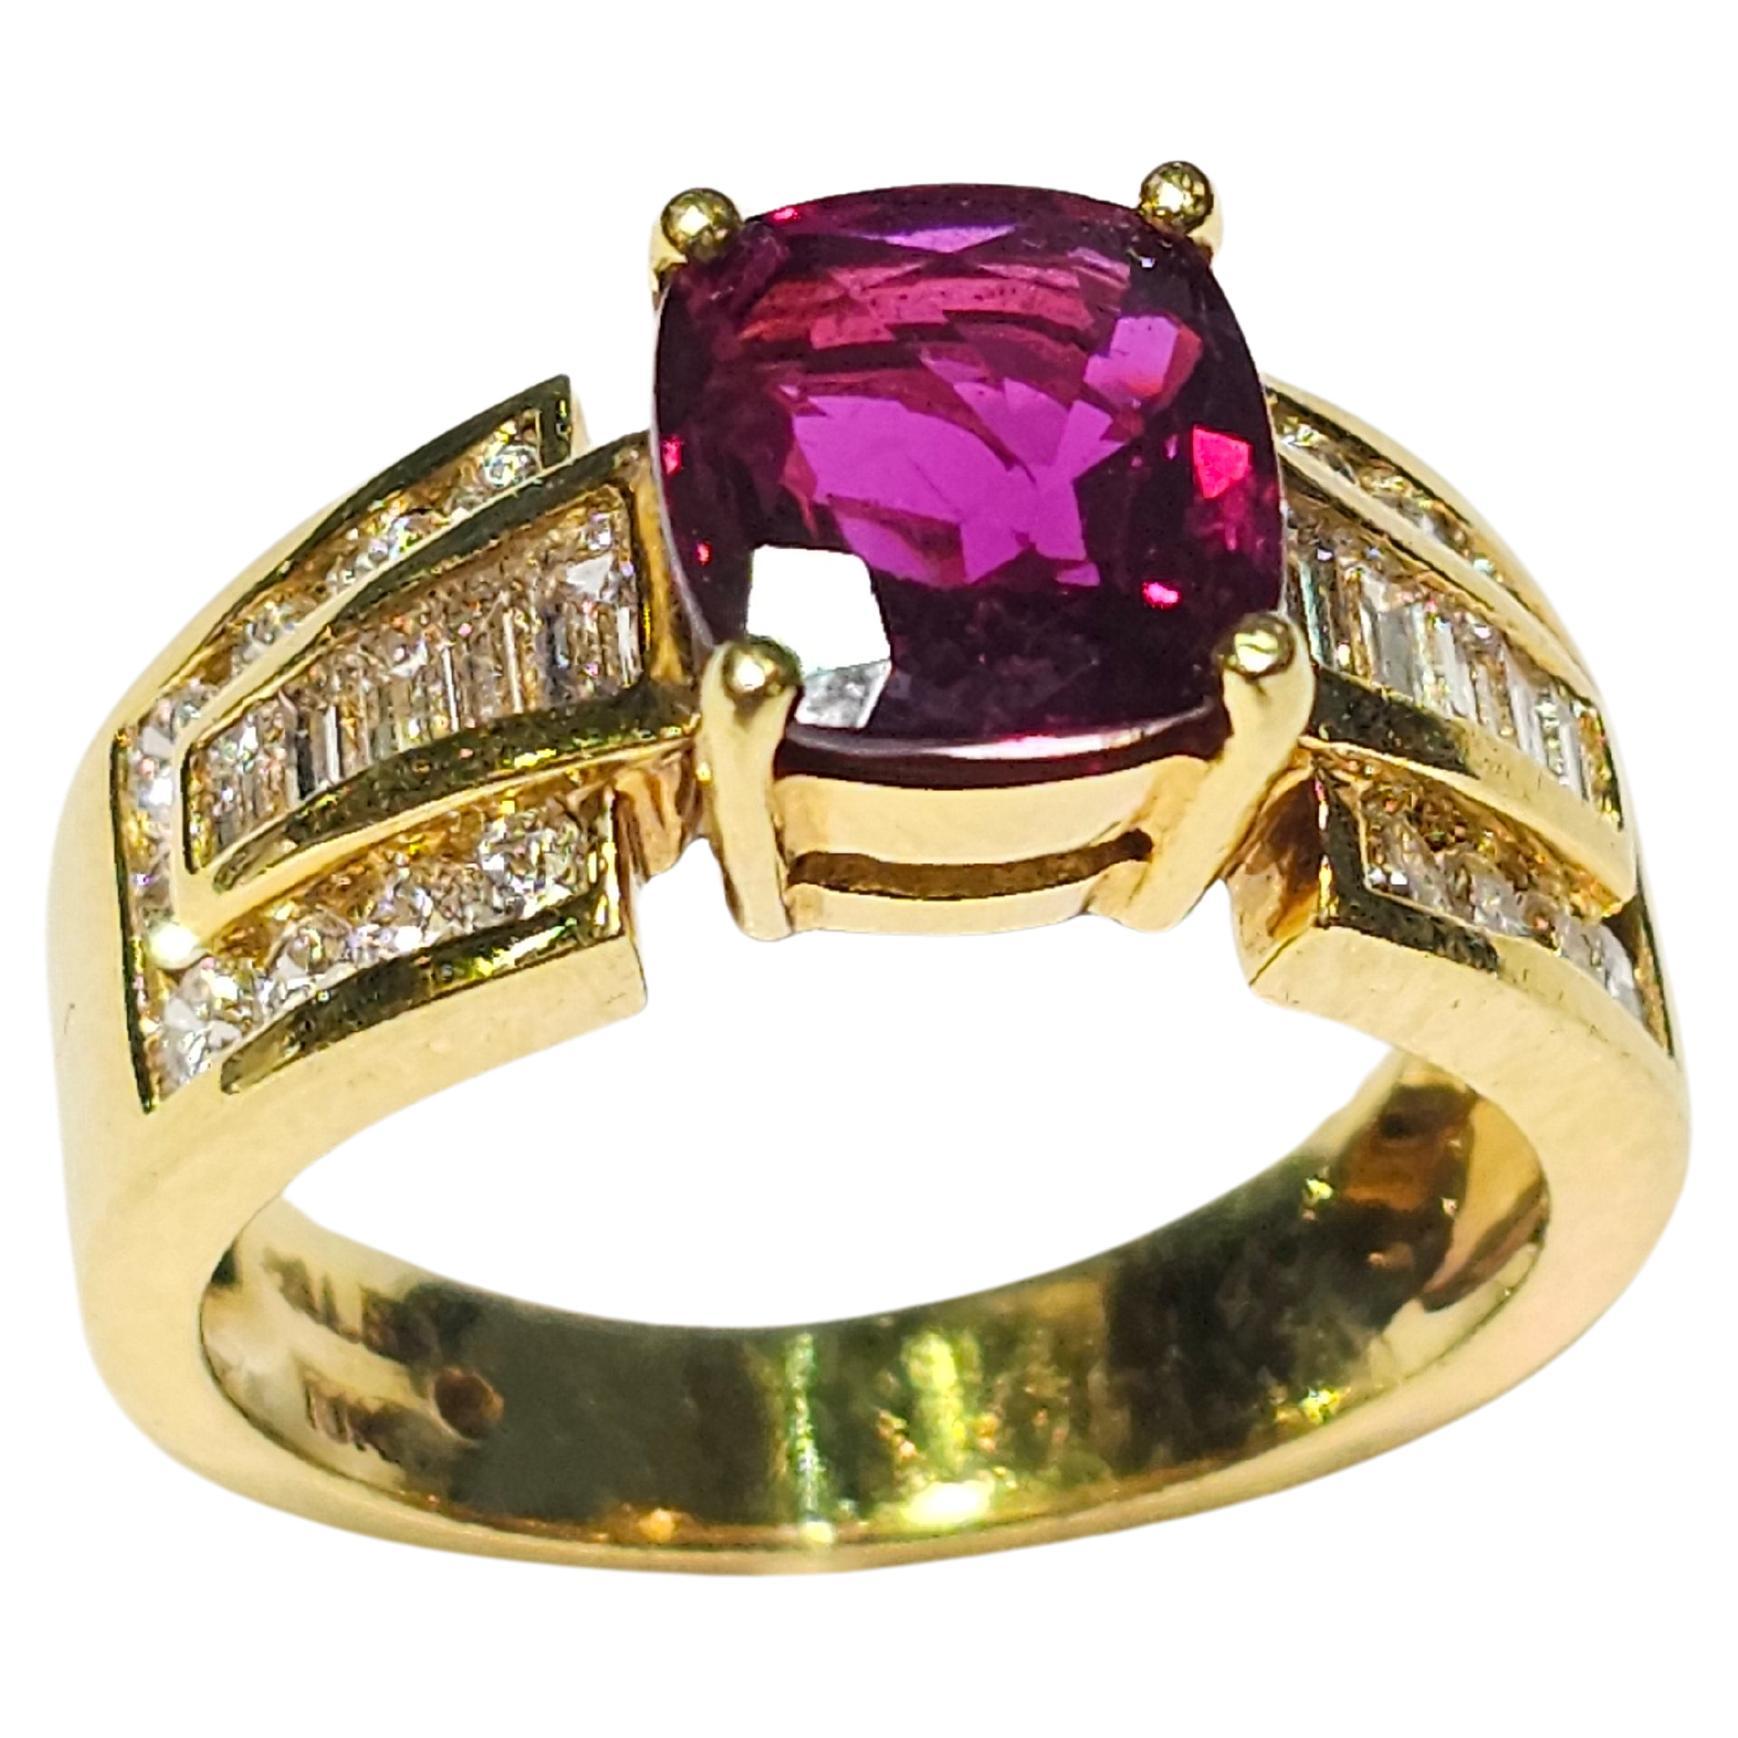 Ruby & Diamond Men's Ring

An 18 karat yellow gold ring set with a cushion cut ruby, 10 baguette cut diamonds, and 18 round cut diamonds

Accompanied by an AGL report stating that the ruby is of Thai origin and is heated

Ruby Approximate Weight: